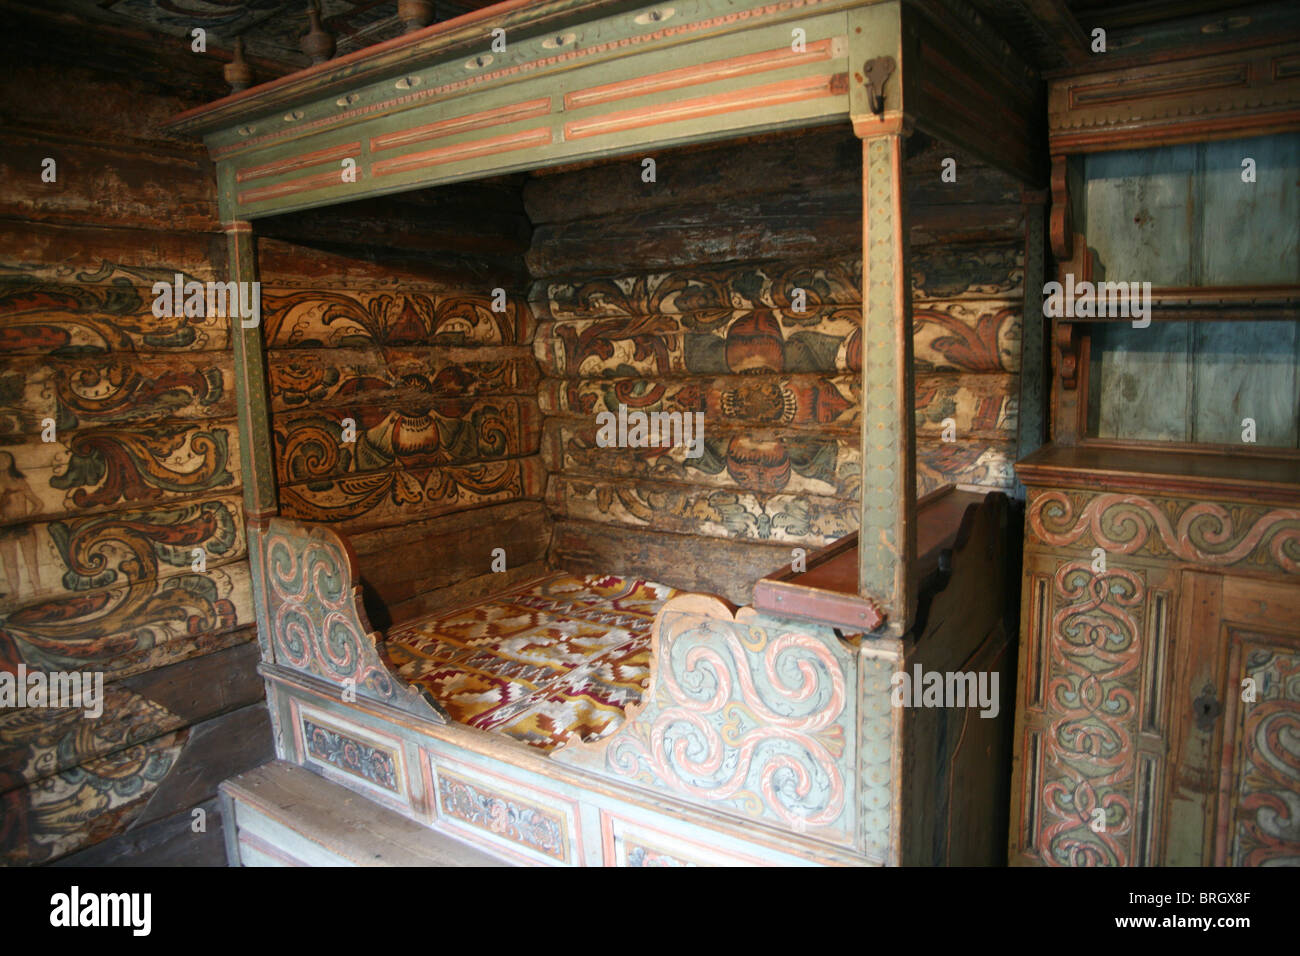 Open air museum in Oslo, Bygdoy folks museum with traditional wooden houses Stock Photo